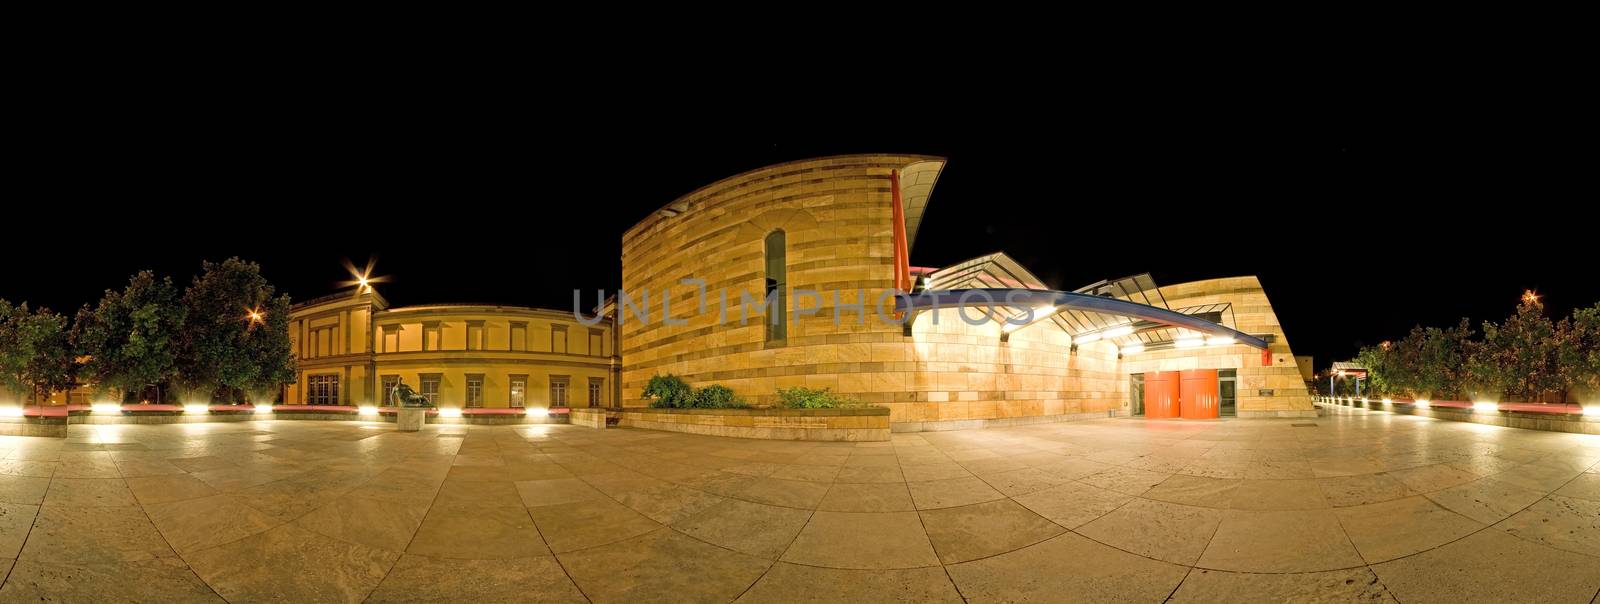 STUTTGART, GERMANY - May 19: Night panorama (main entrance) of the "Staatsgalerie" on May 19, 2009 in Stuttgart, Germany. The museum hosts several exhibitions each year.